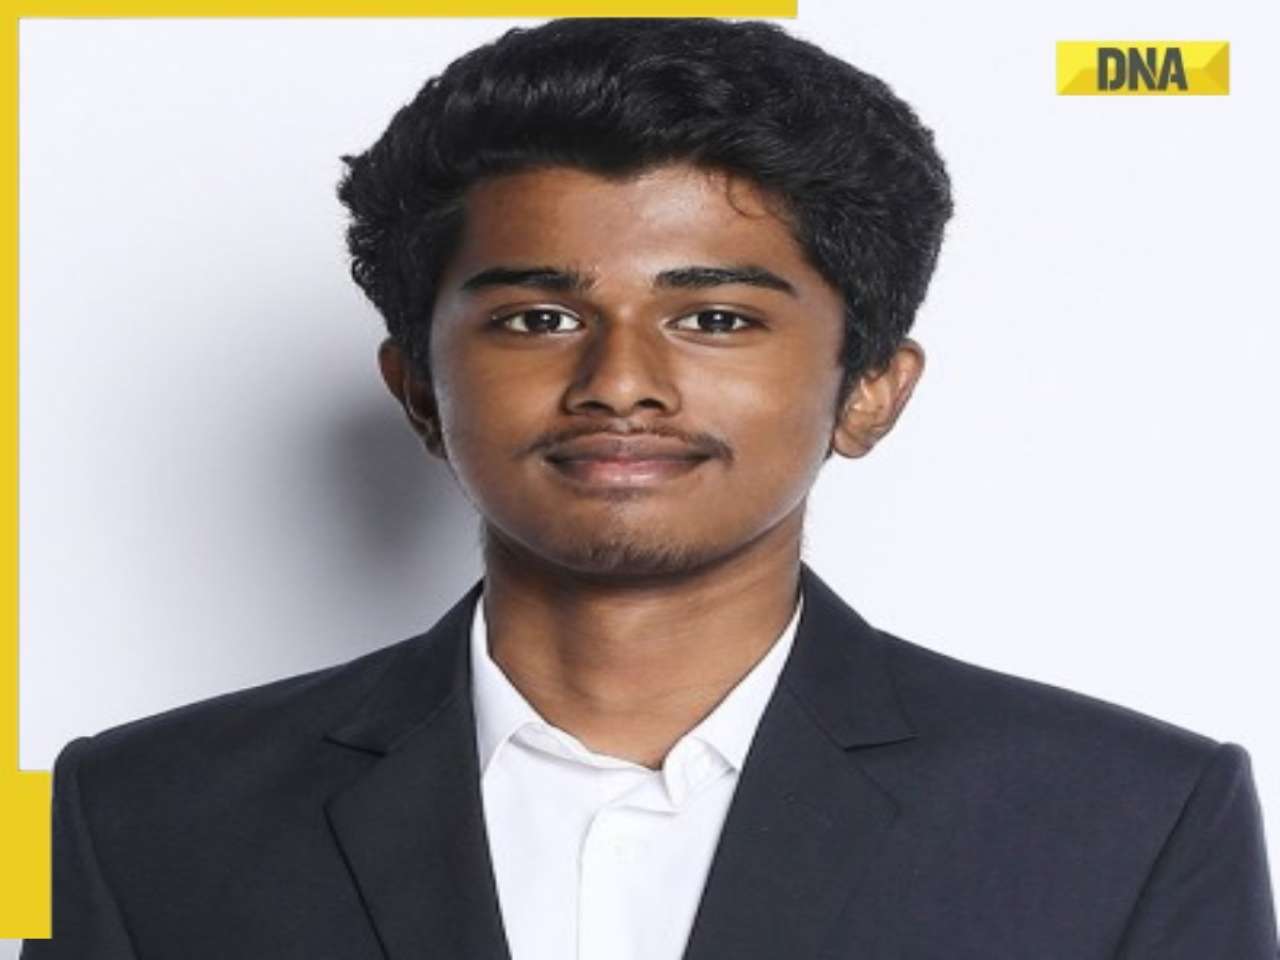 Meet one of youngest Indian CEOs who began learning computer at 5, developed app at 9, started company at 13, now he is…